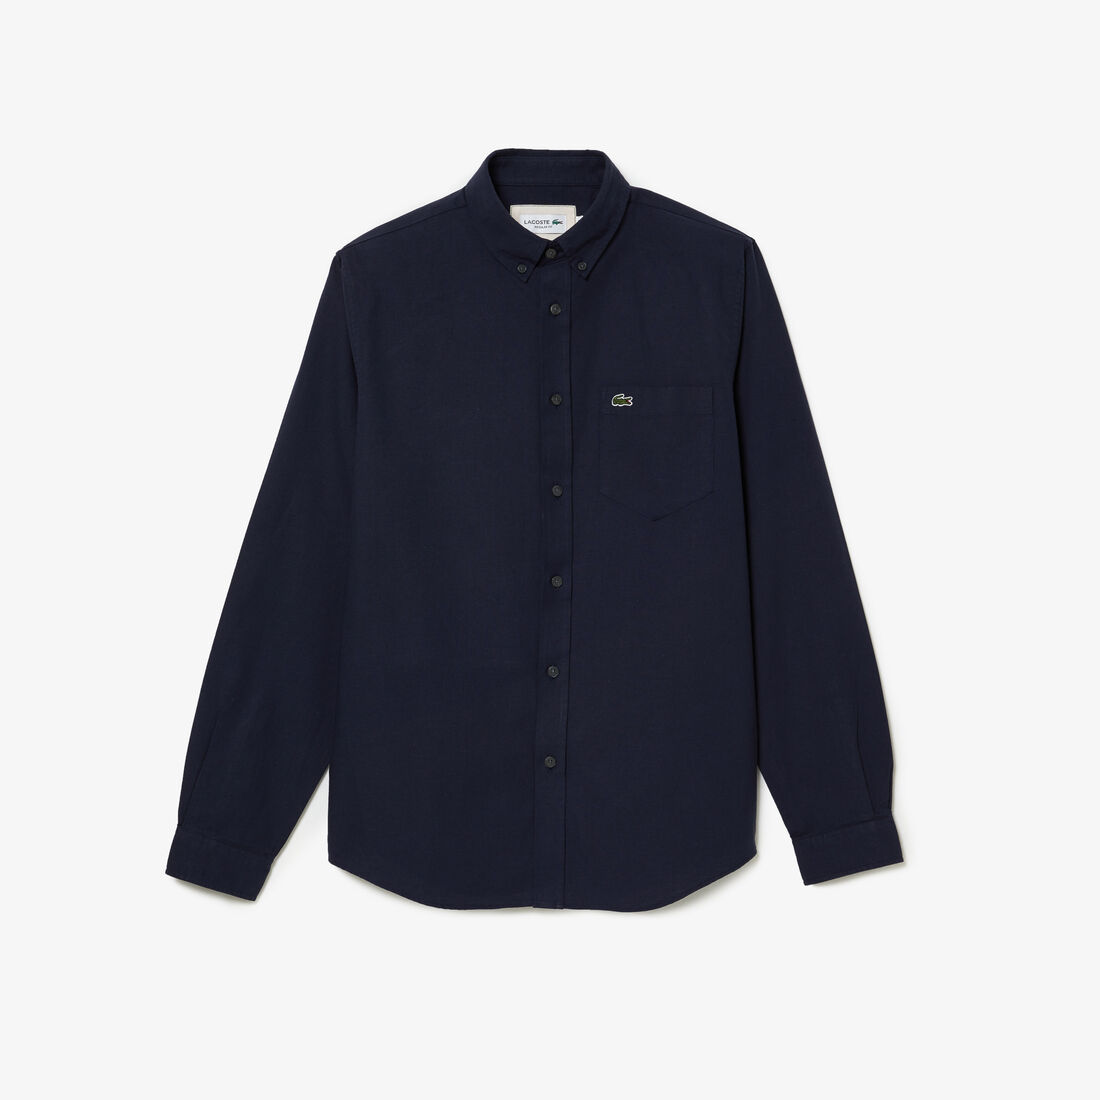 Lacoste Buttoned Collar Oxford Cotton Men's Shirts Navy Blue | 659-IPSOZQ